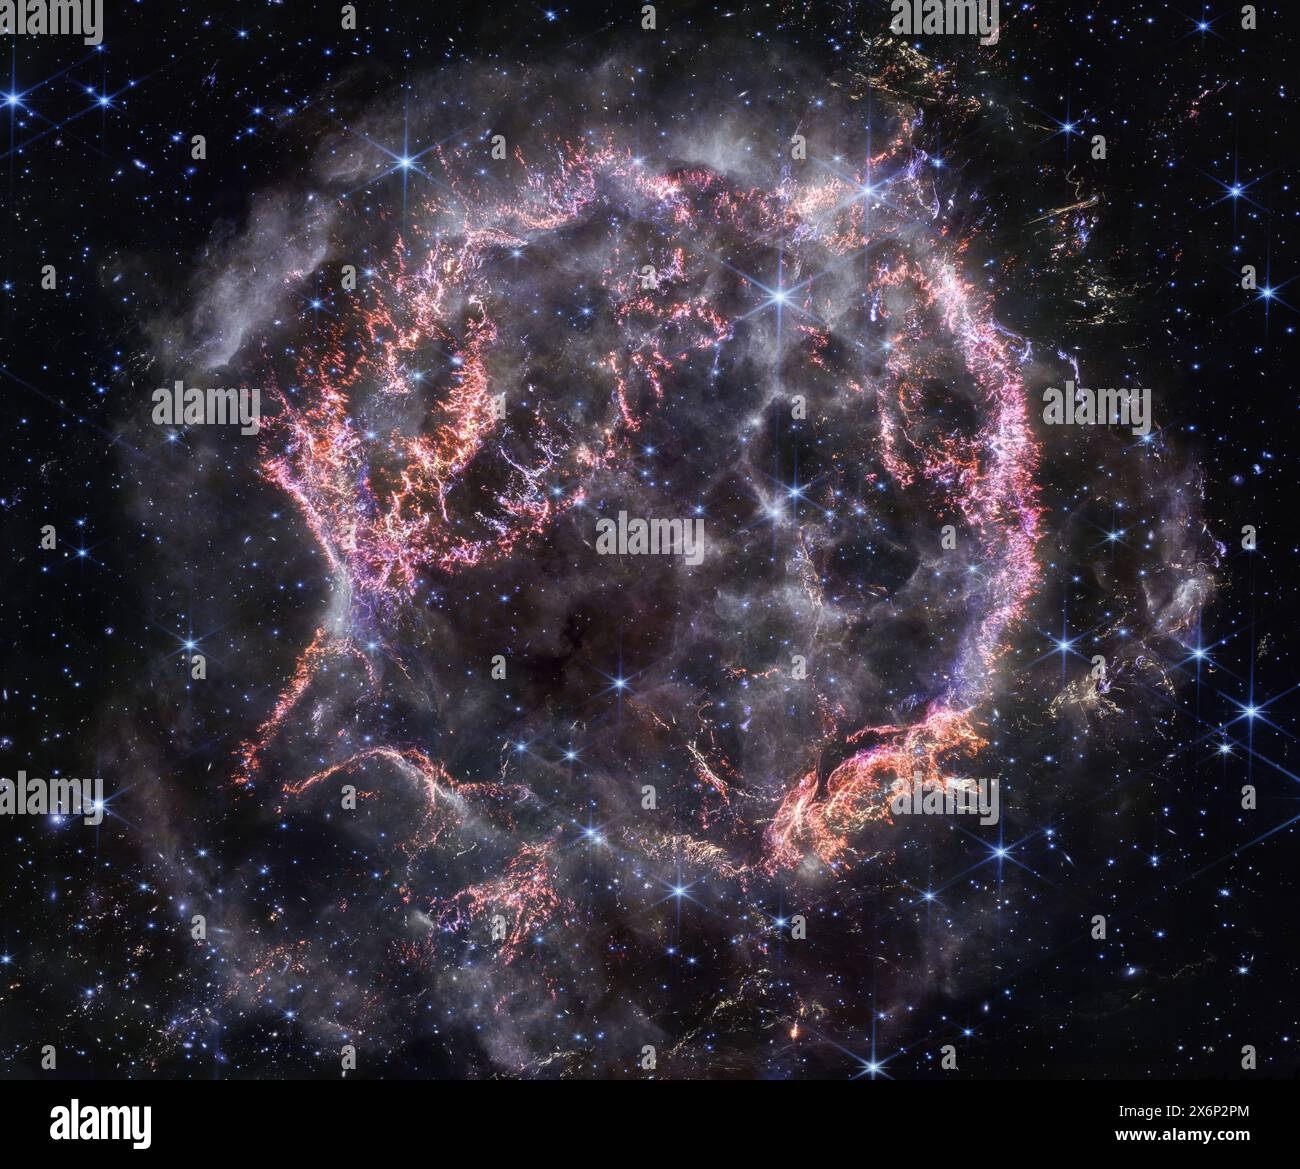 Baby Cas A supernova remnant in the constellation Cassiopeia. Stock Photo